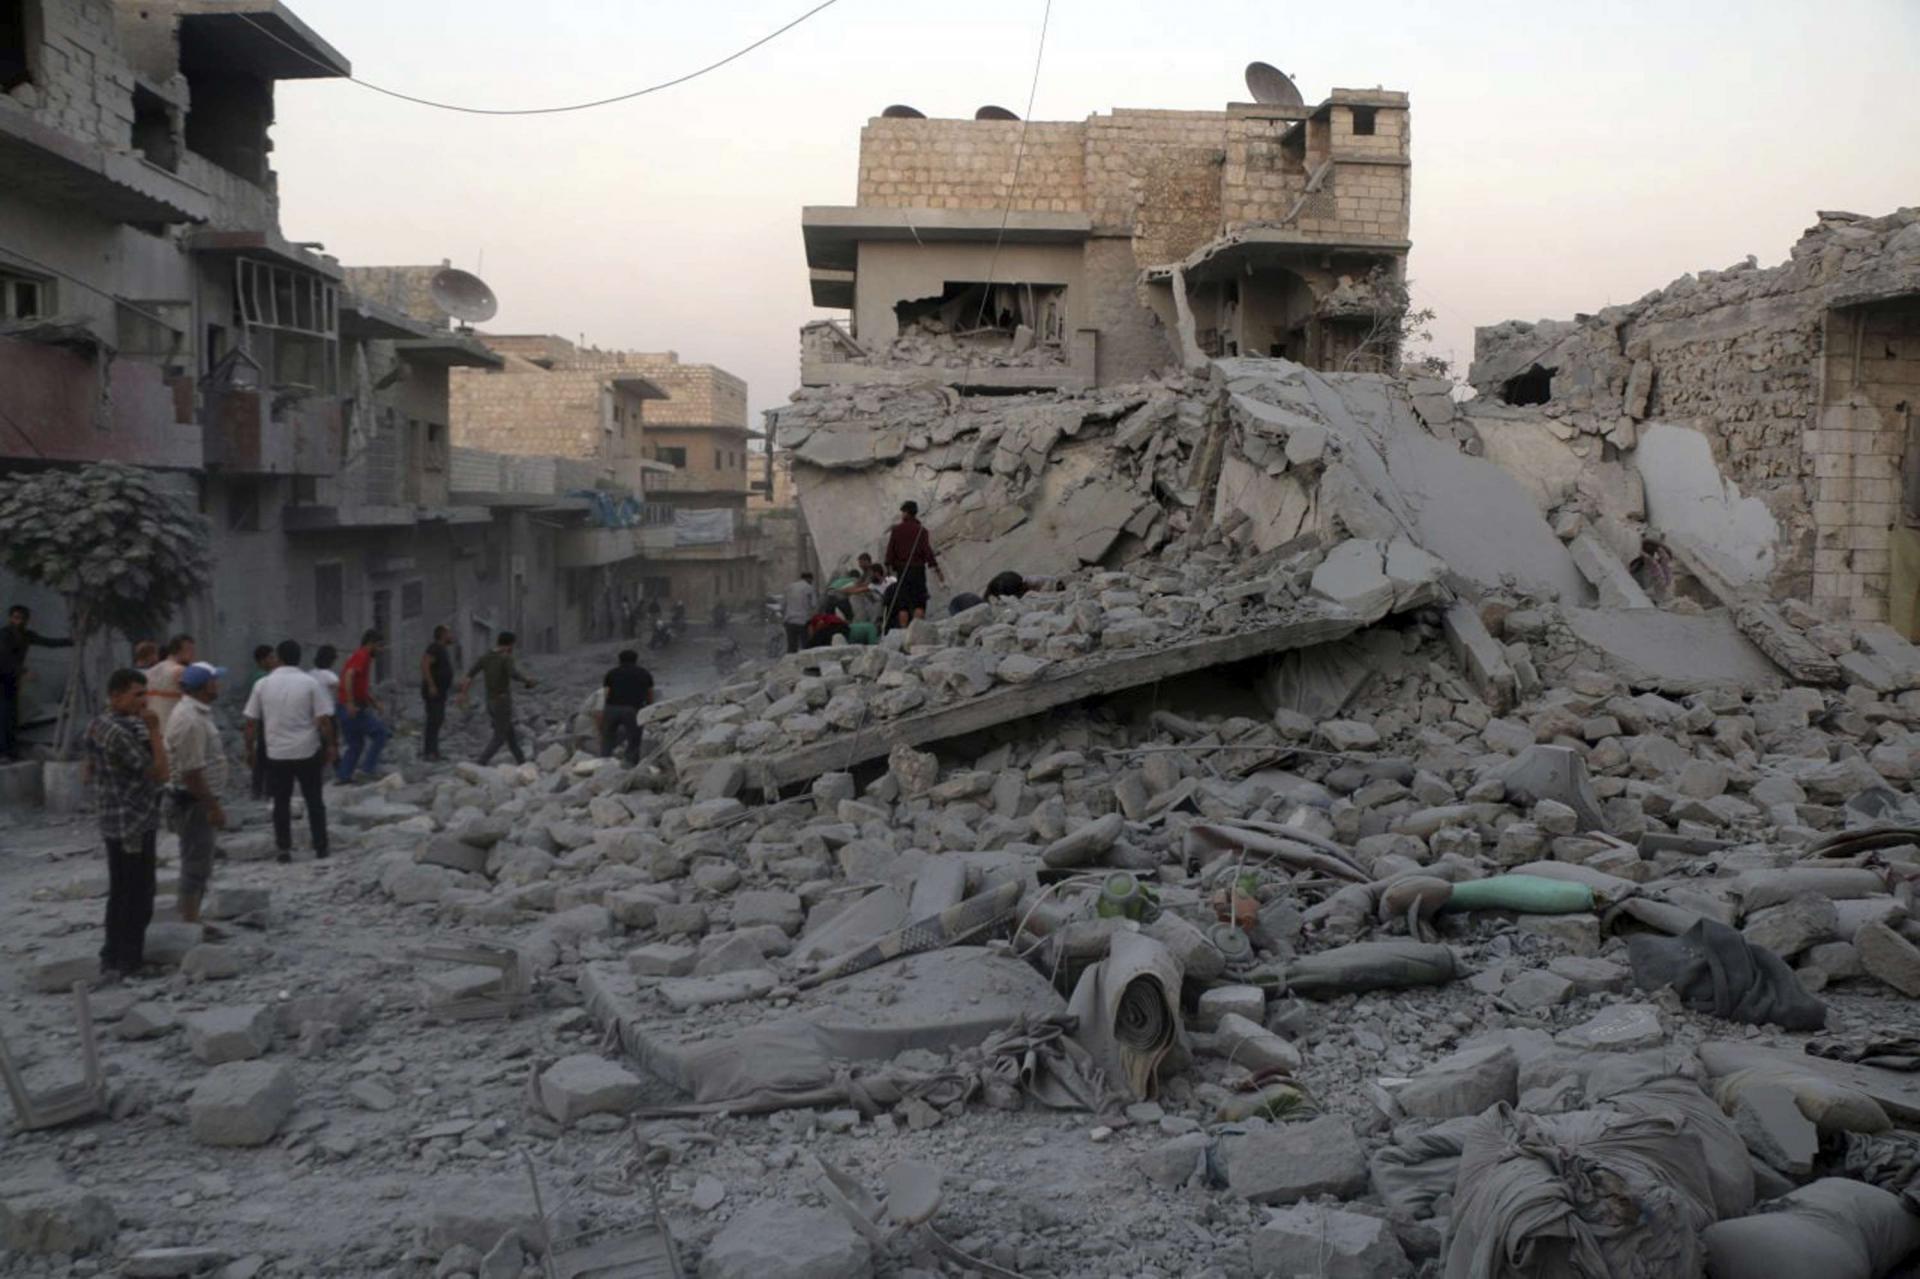 Syrian people searching for victims under the rubble of destroyed buildings